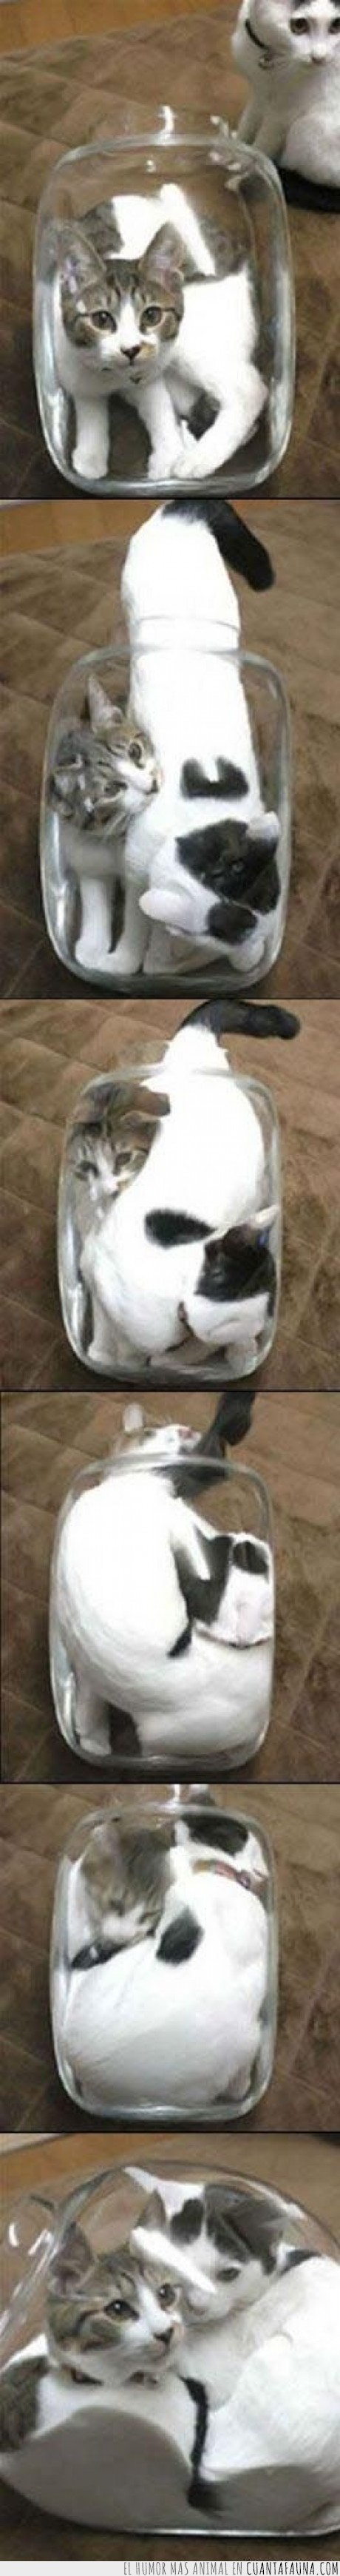 1171 - TWO CATS ONE CUP